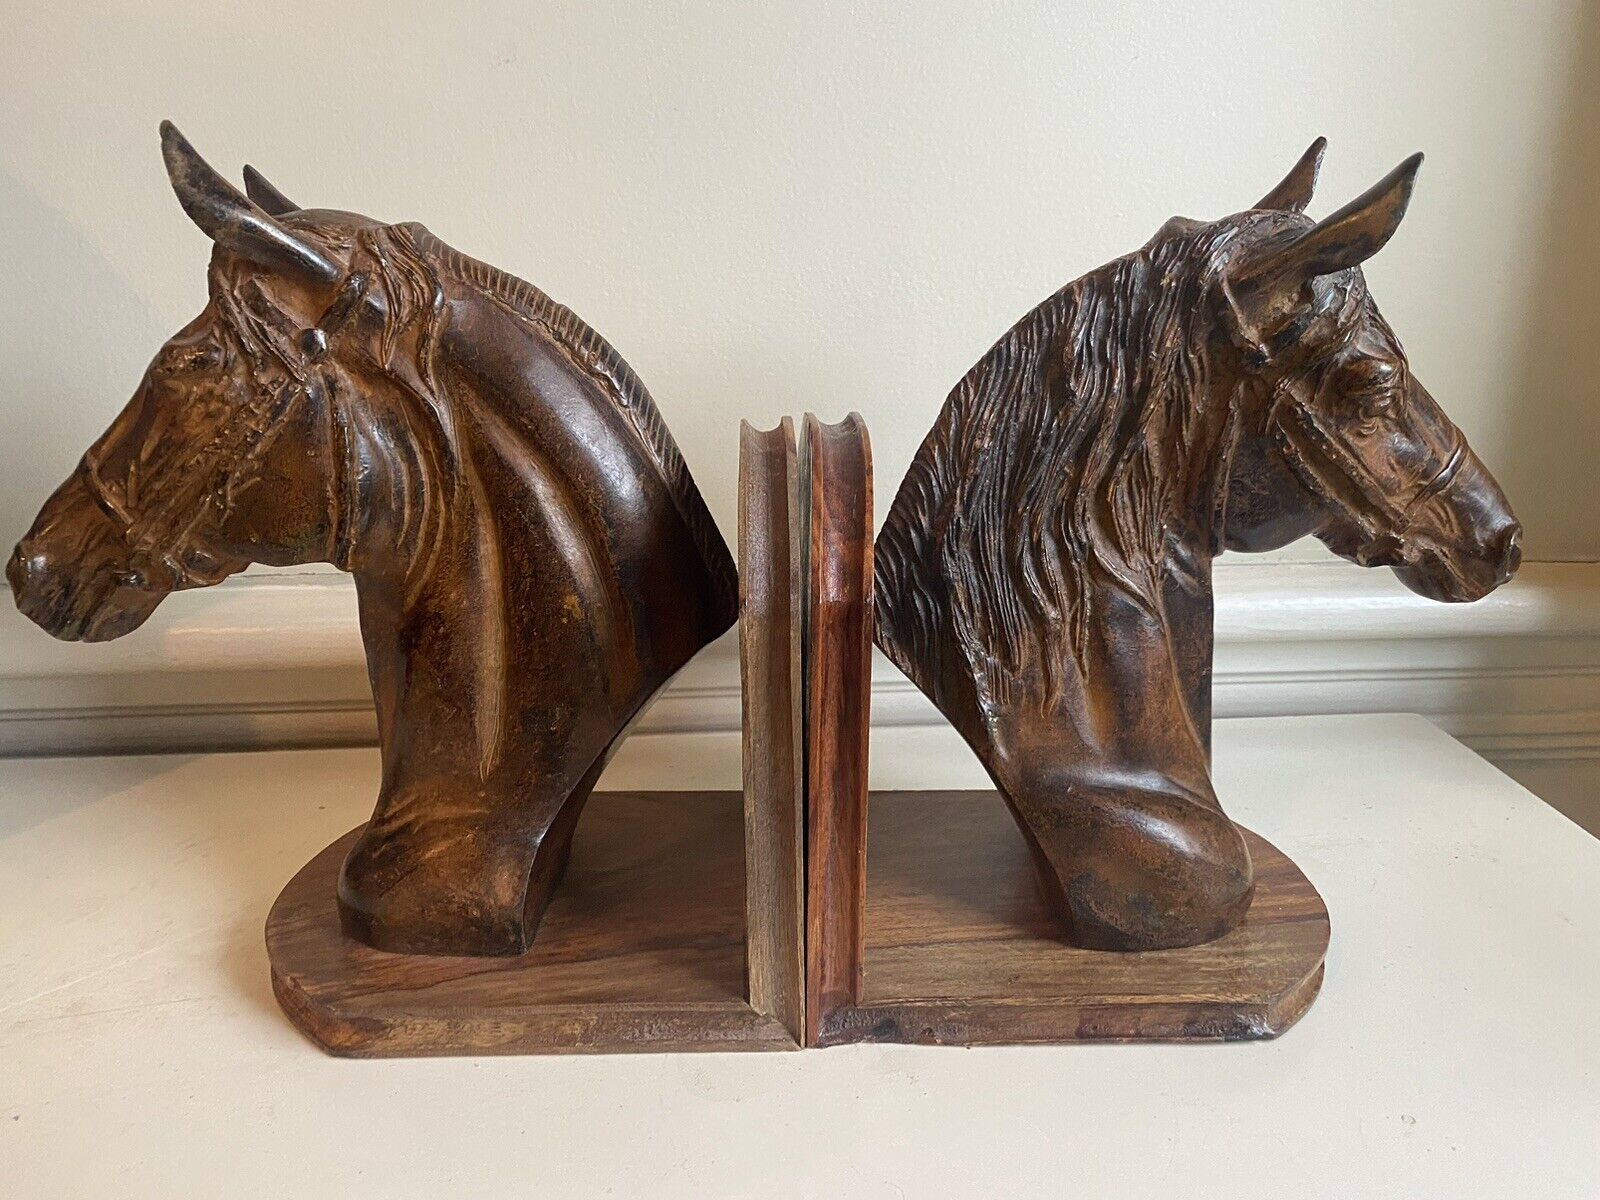 Vintage Horse Head Bookends Cast Metal 9” Equestrian - Wood Base Classy & Heavy